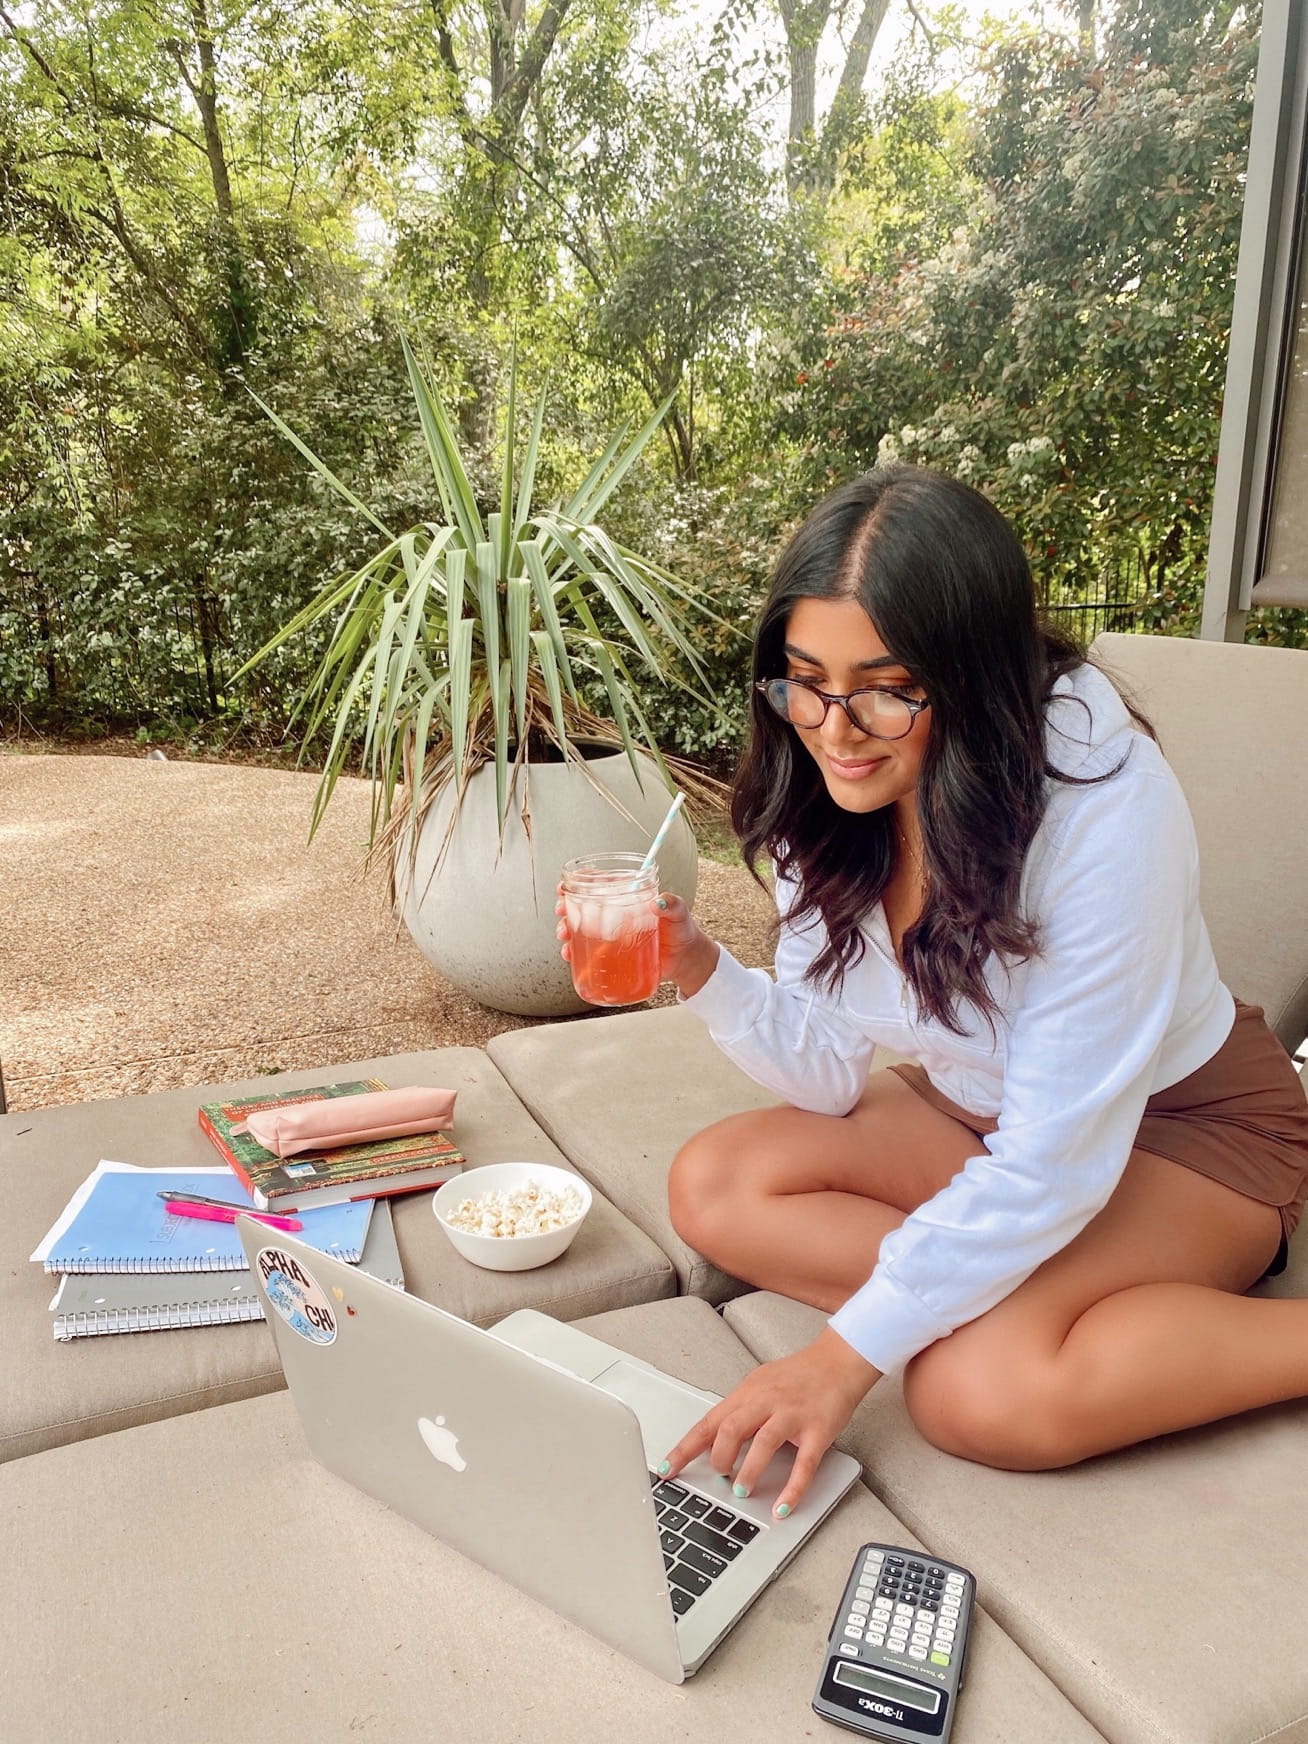 UTA student Hanna Lone on her computer next to plant